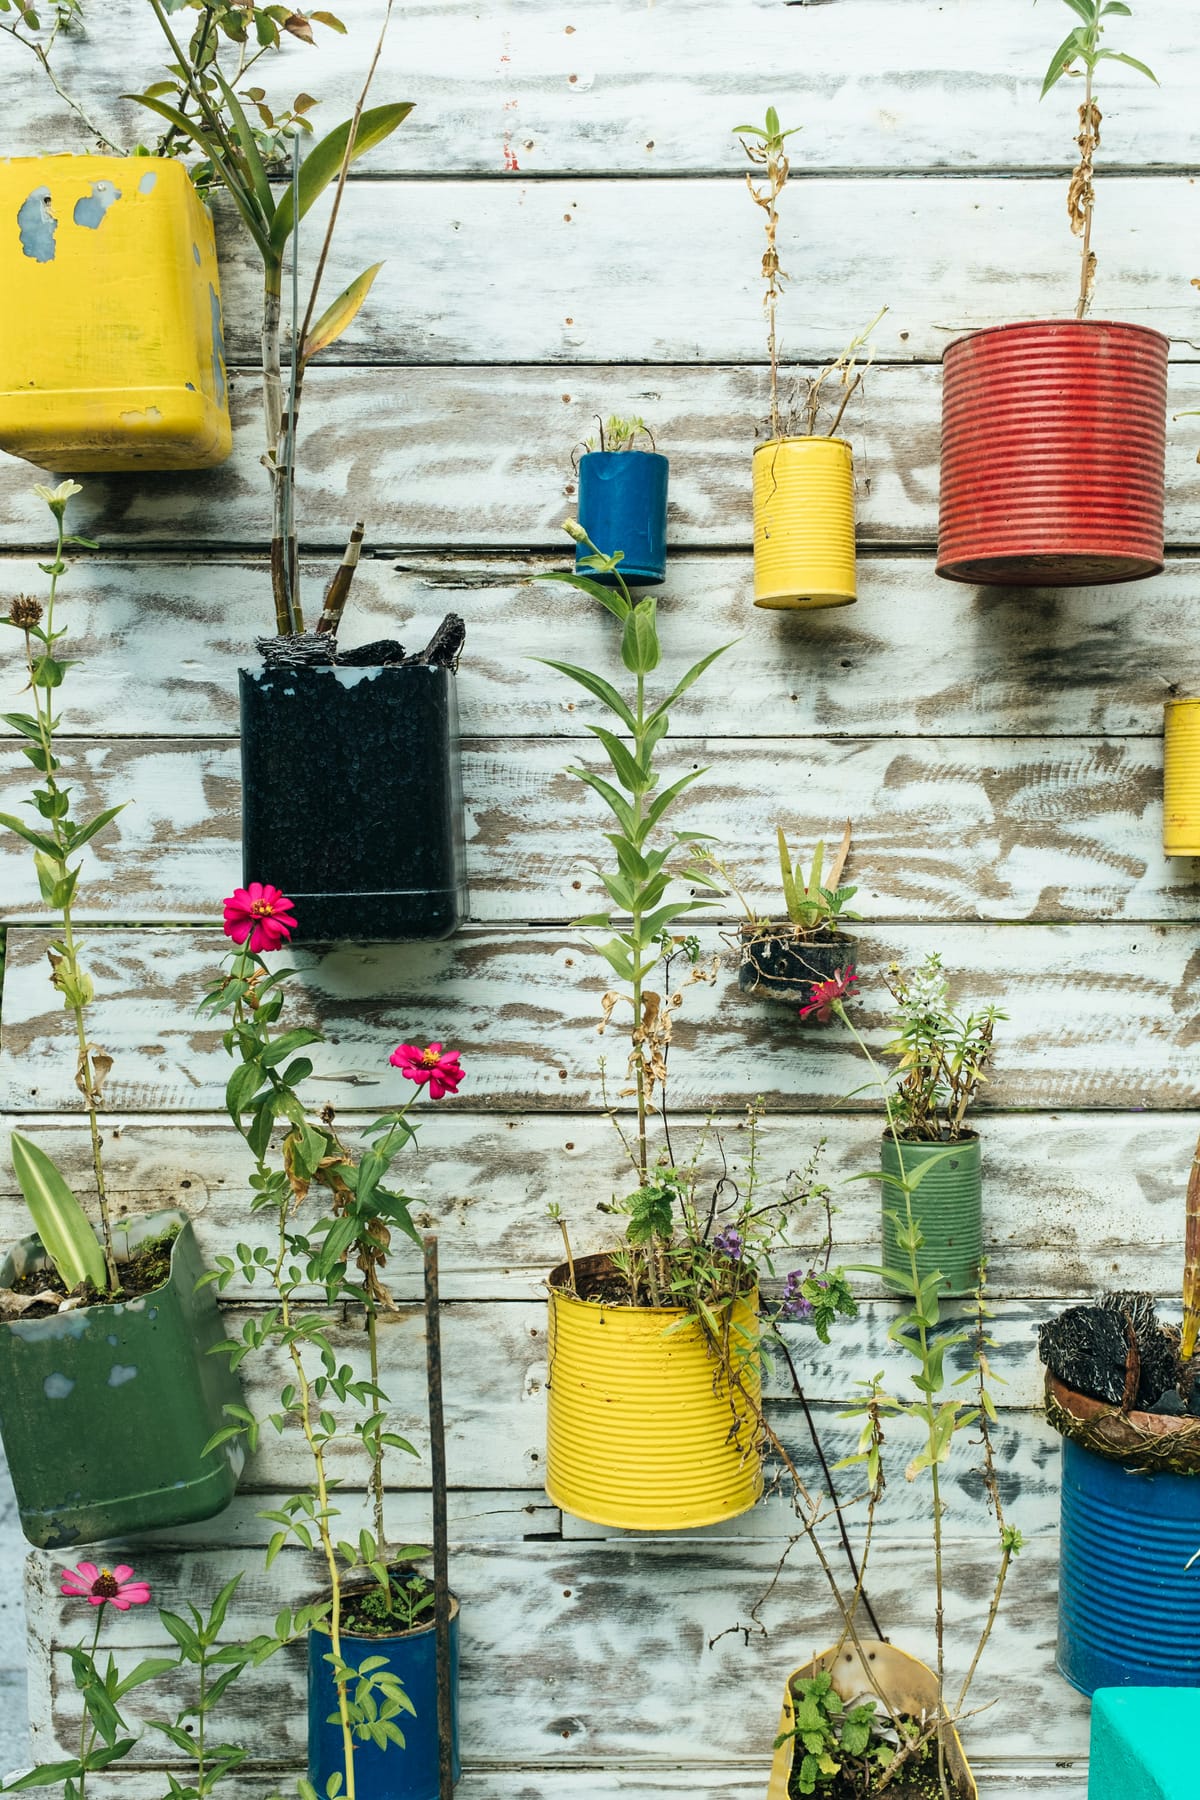 Photograph of a living wall with colourful tin cans mounted on it, each with a plant growing inside